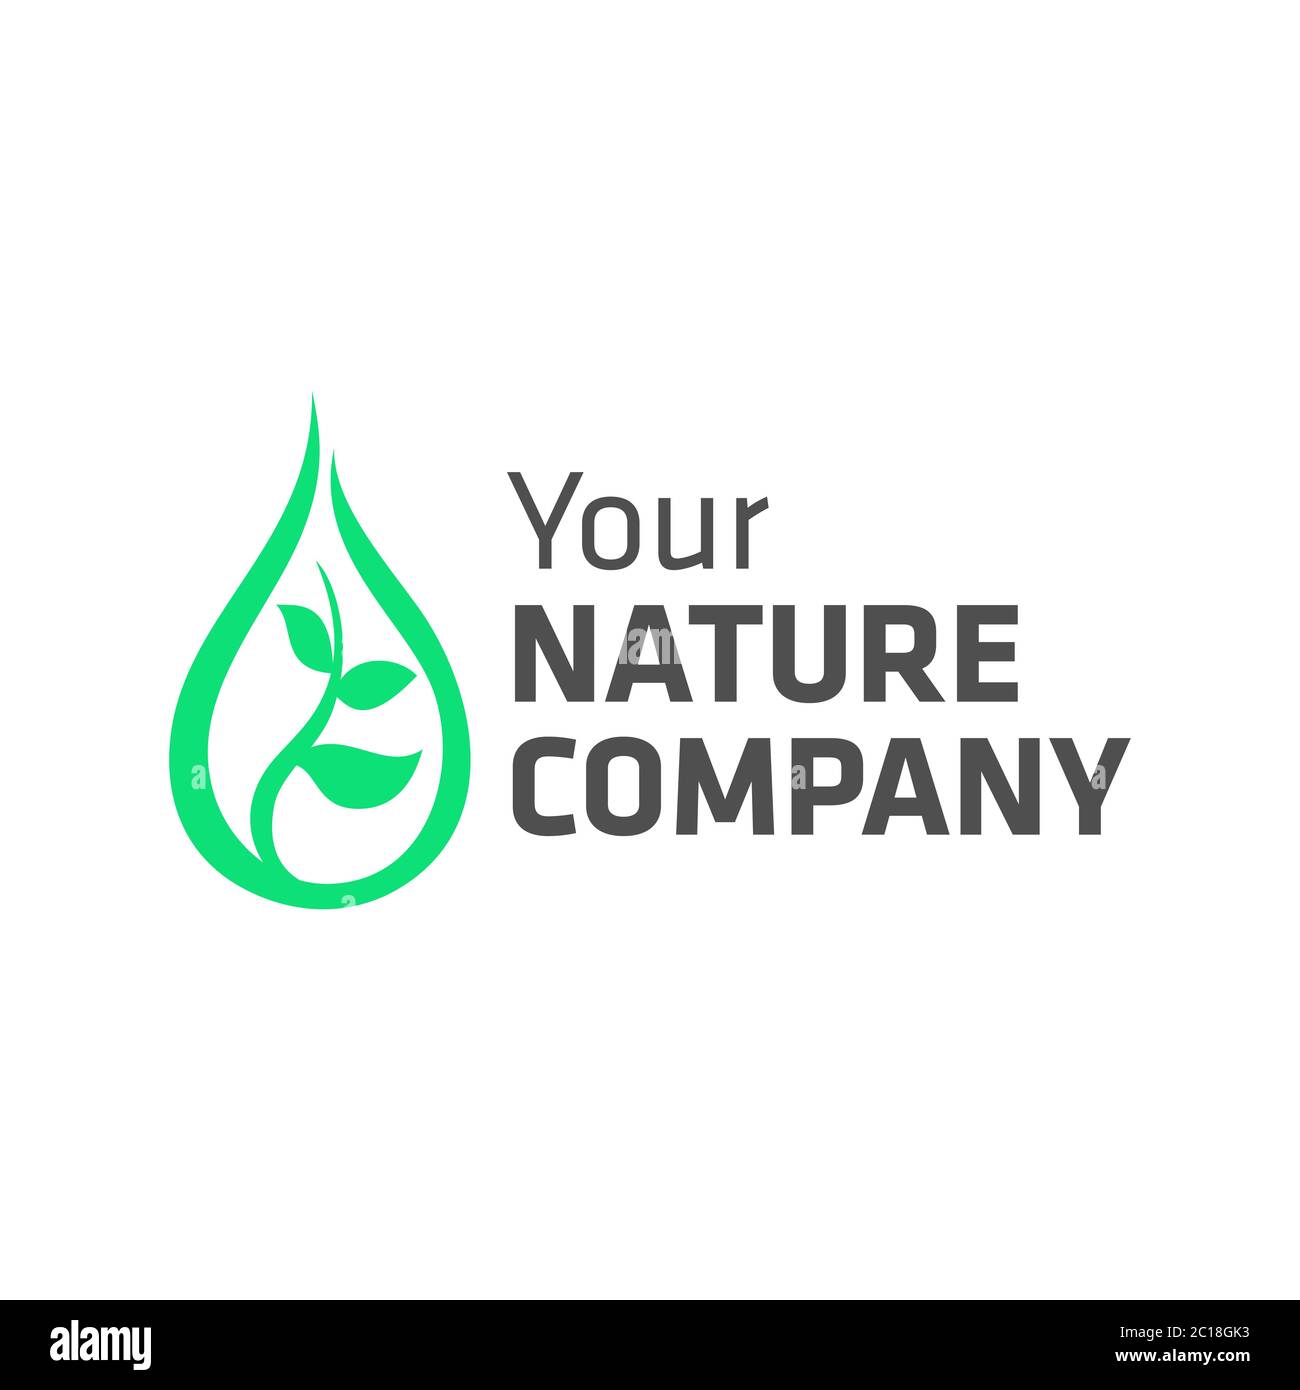 Nature company logos with abstract shapes of water droplets and growing plant seeds. Suitable for the health industry logo, nature conservation Stock Vector